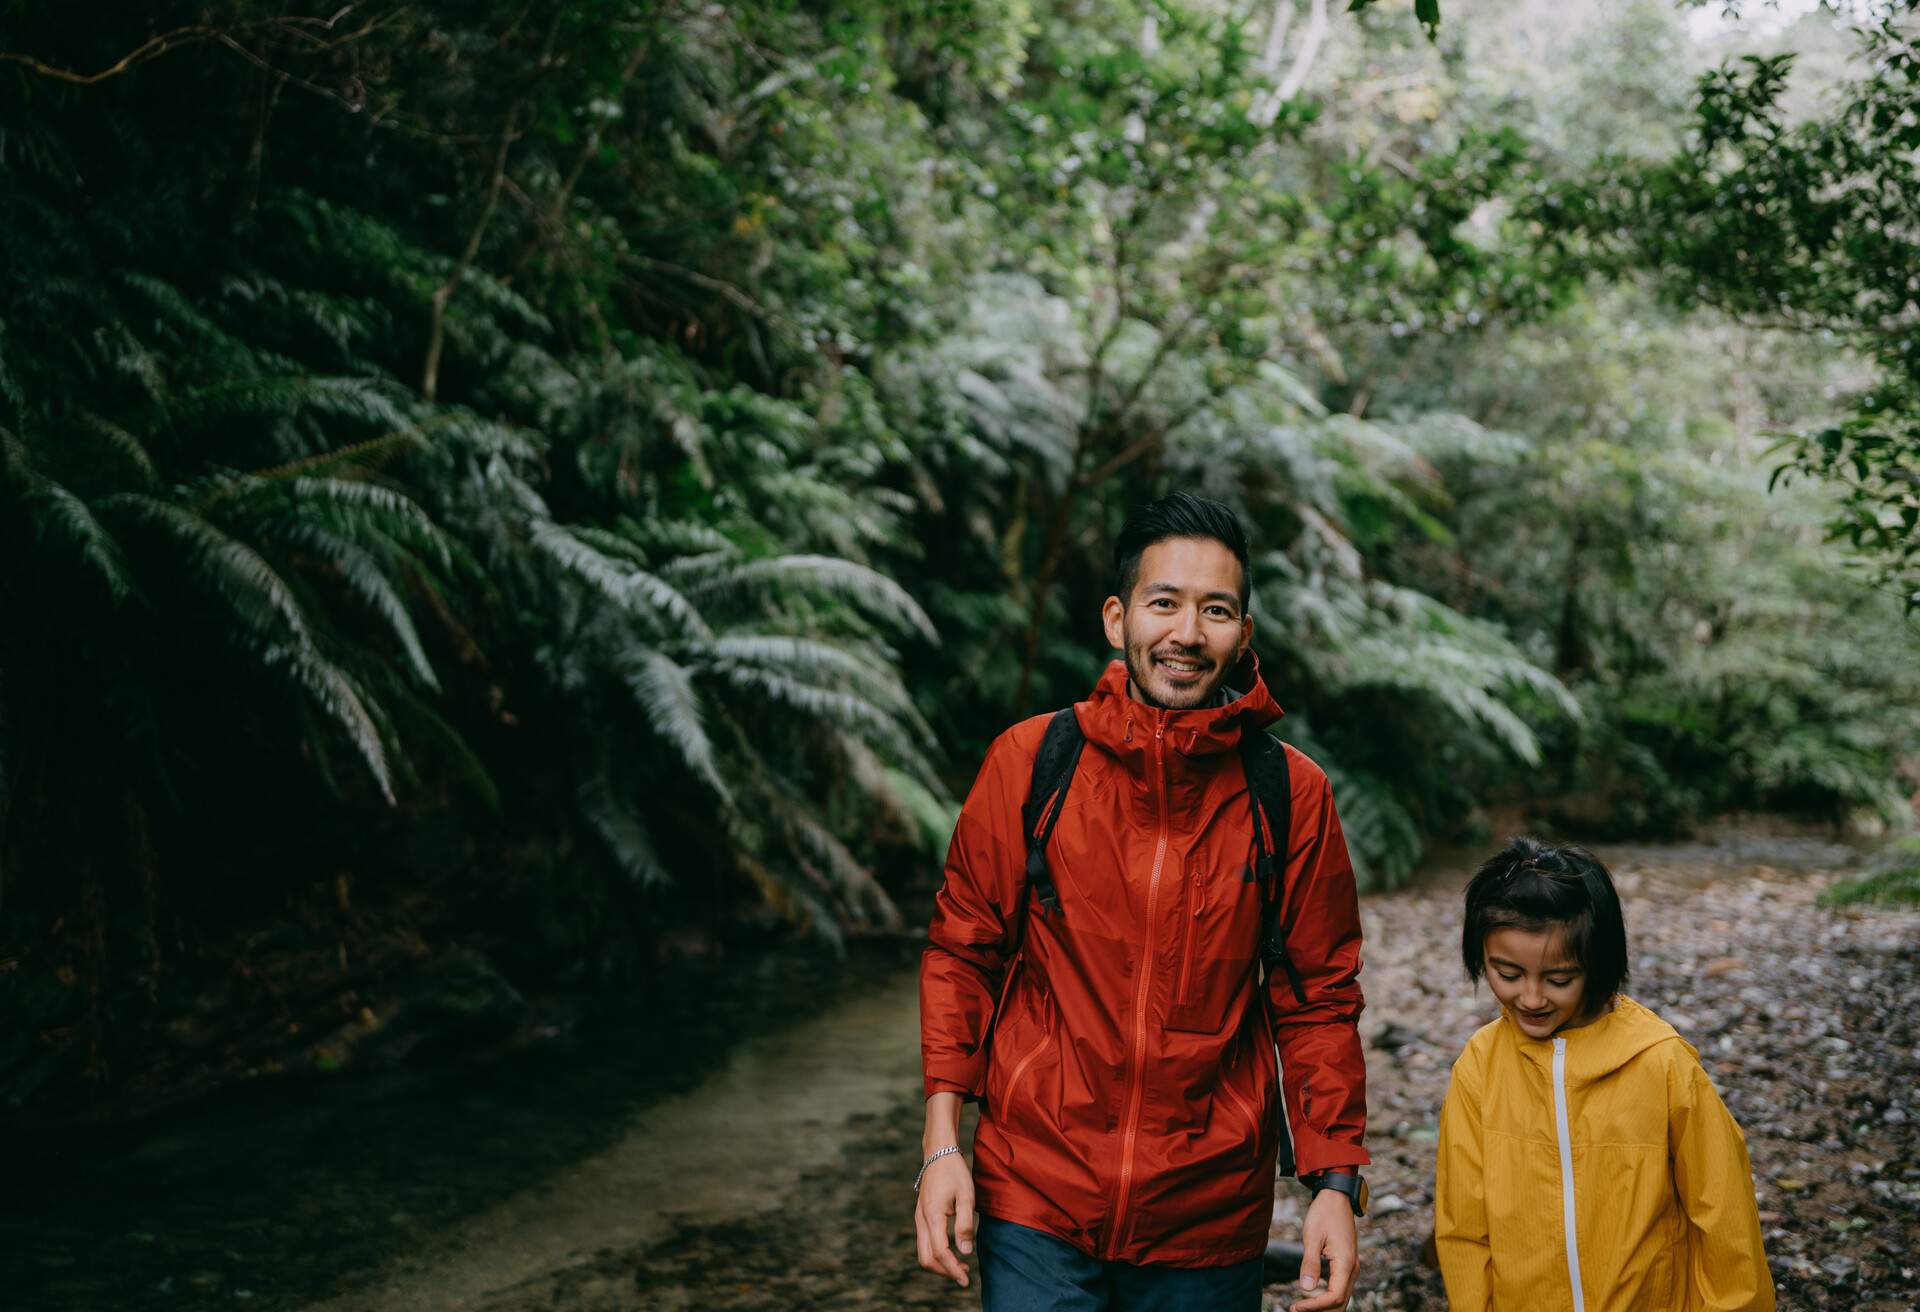 PEOPLE_MAN_KID_GIRL_HIKING_FOREST